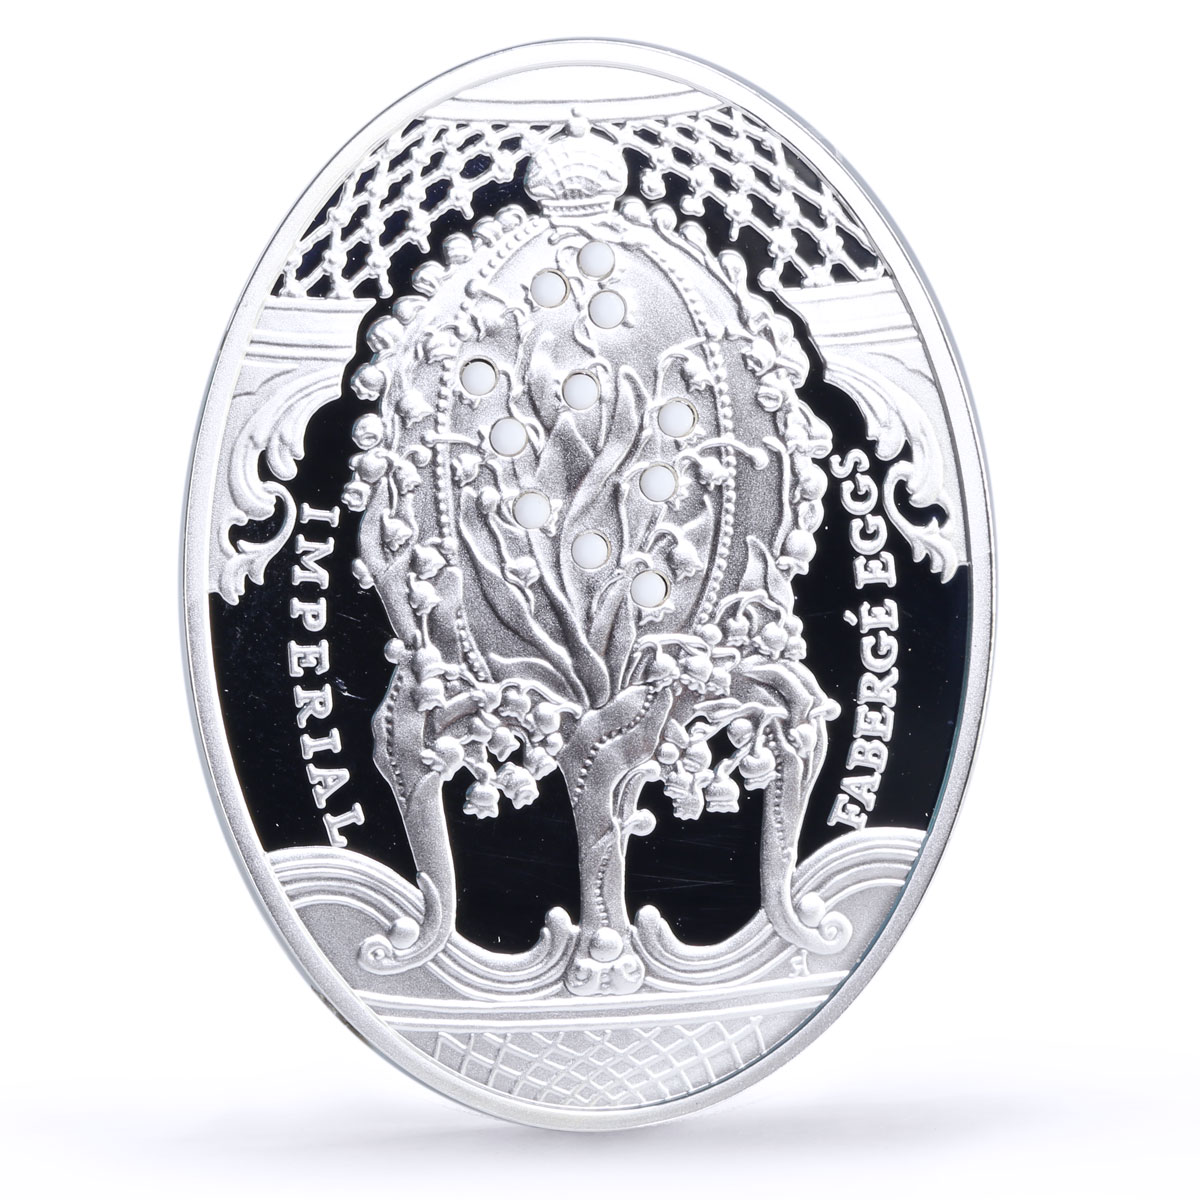 Niue 2 dollars Imperial Faberge Eggs Lily of the Valley Egg Art silver coin 2010